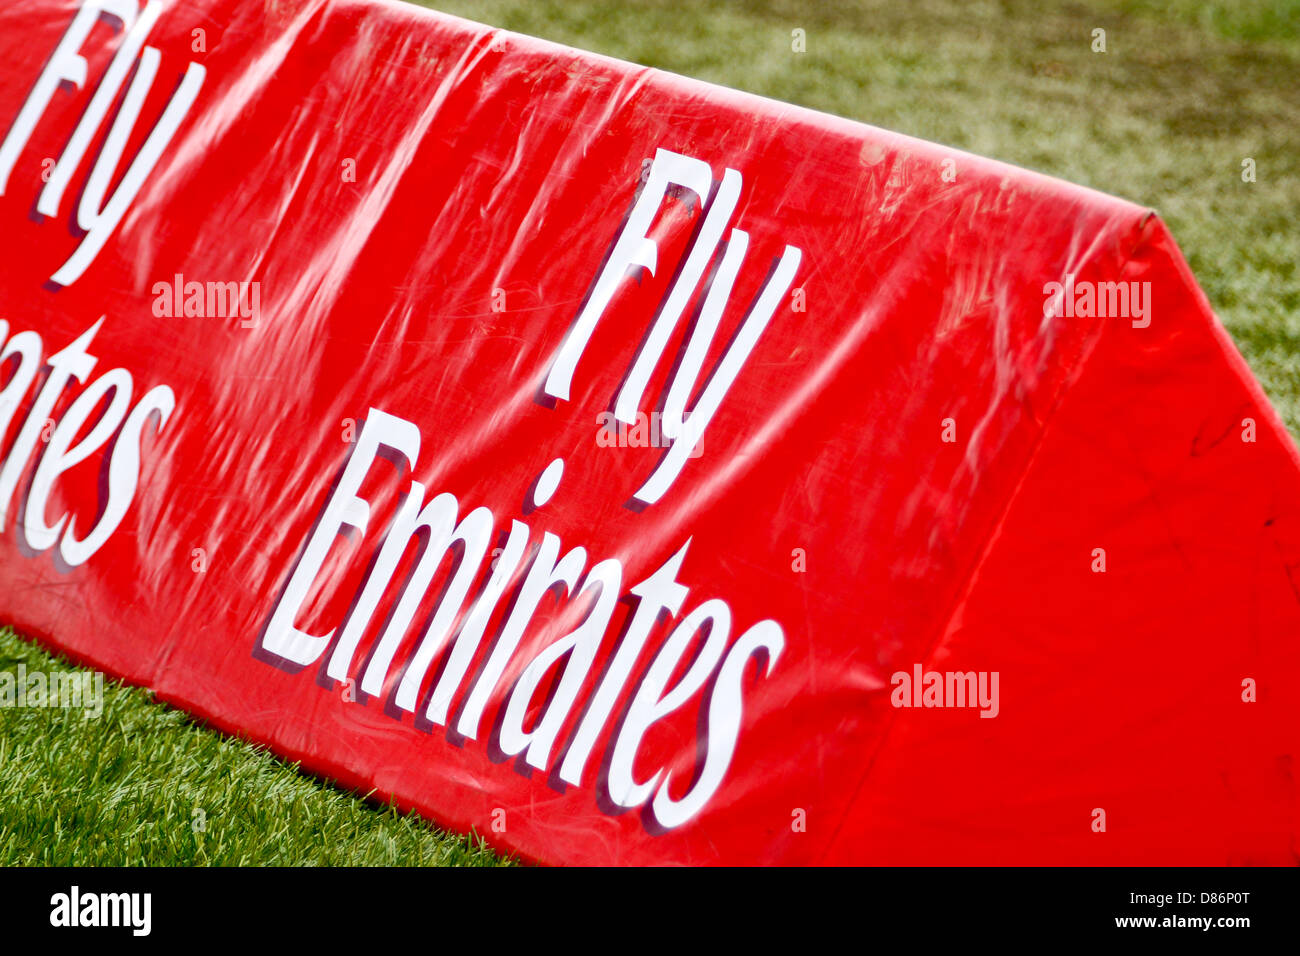 Passo scheda laterale per Emirates Glasgow Sevens Rugby Foto Stock